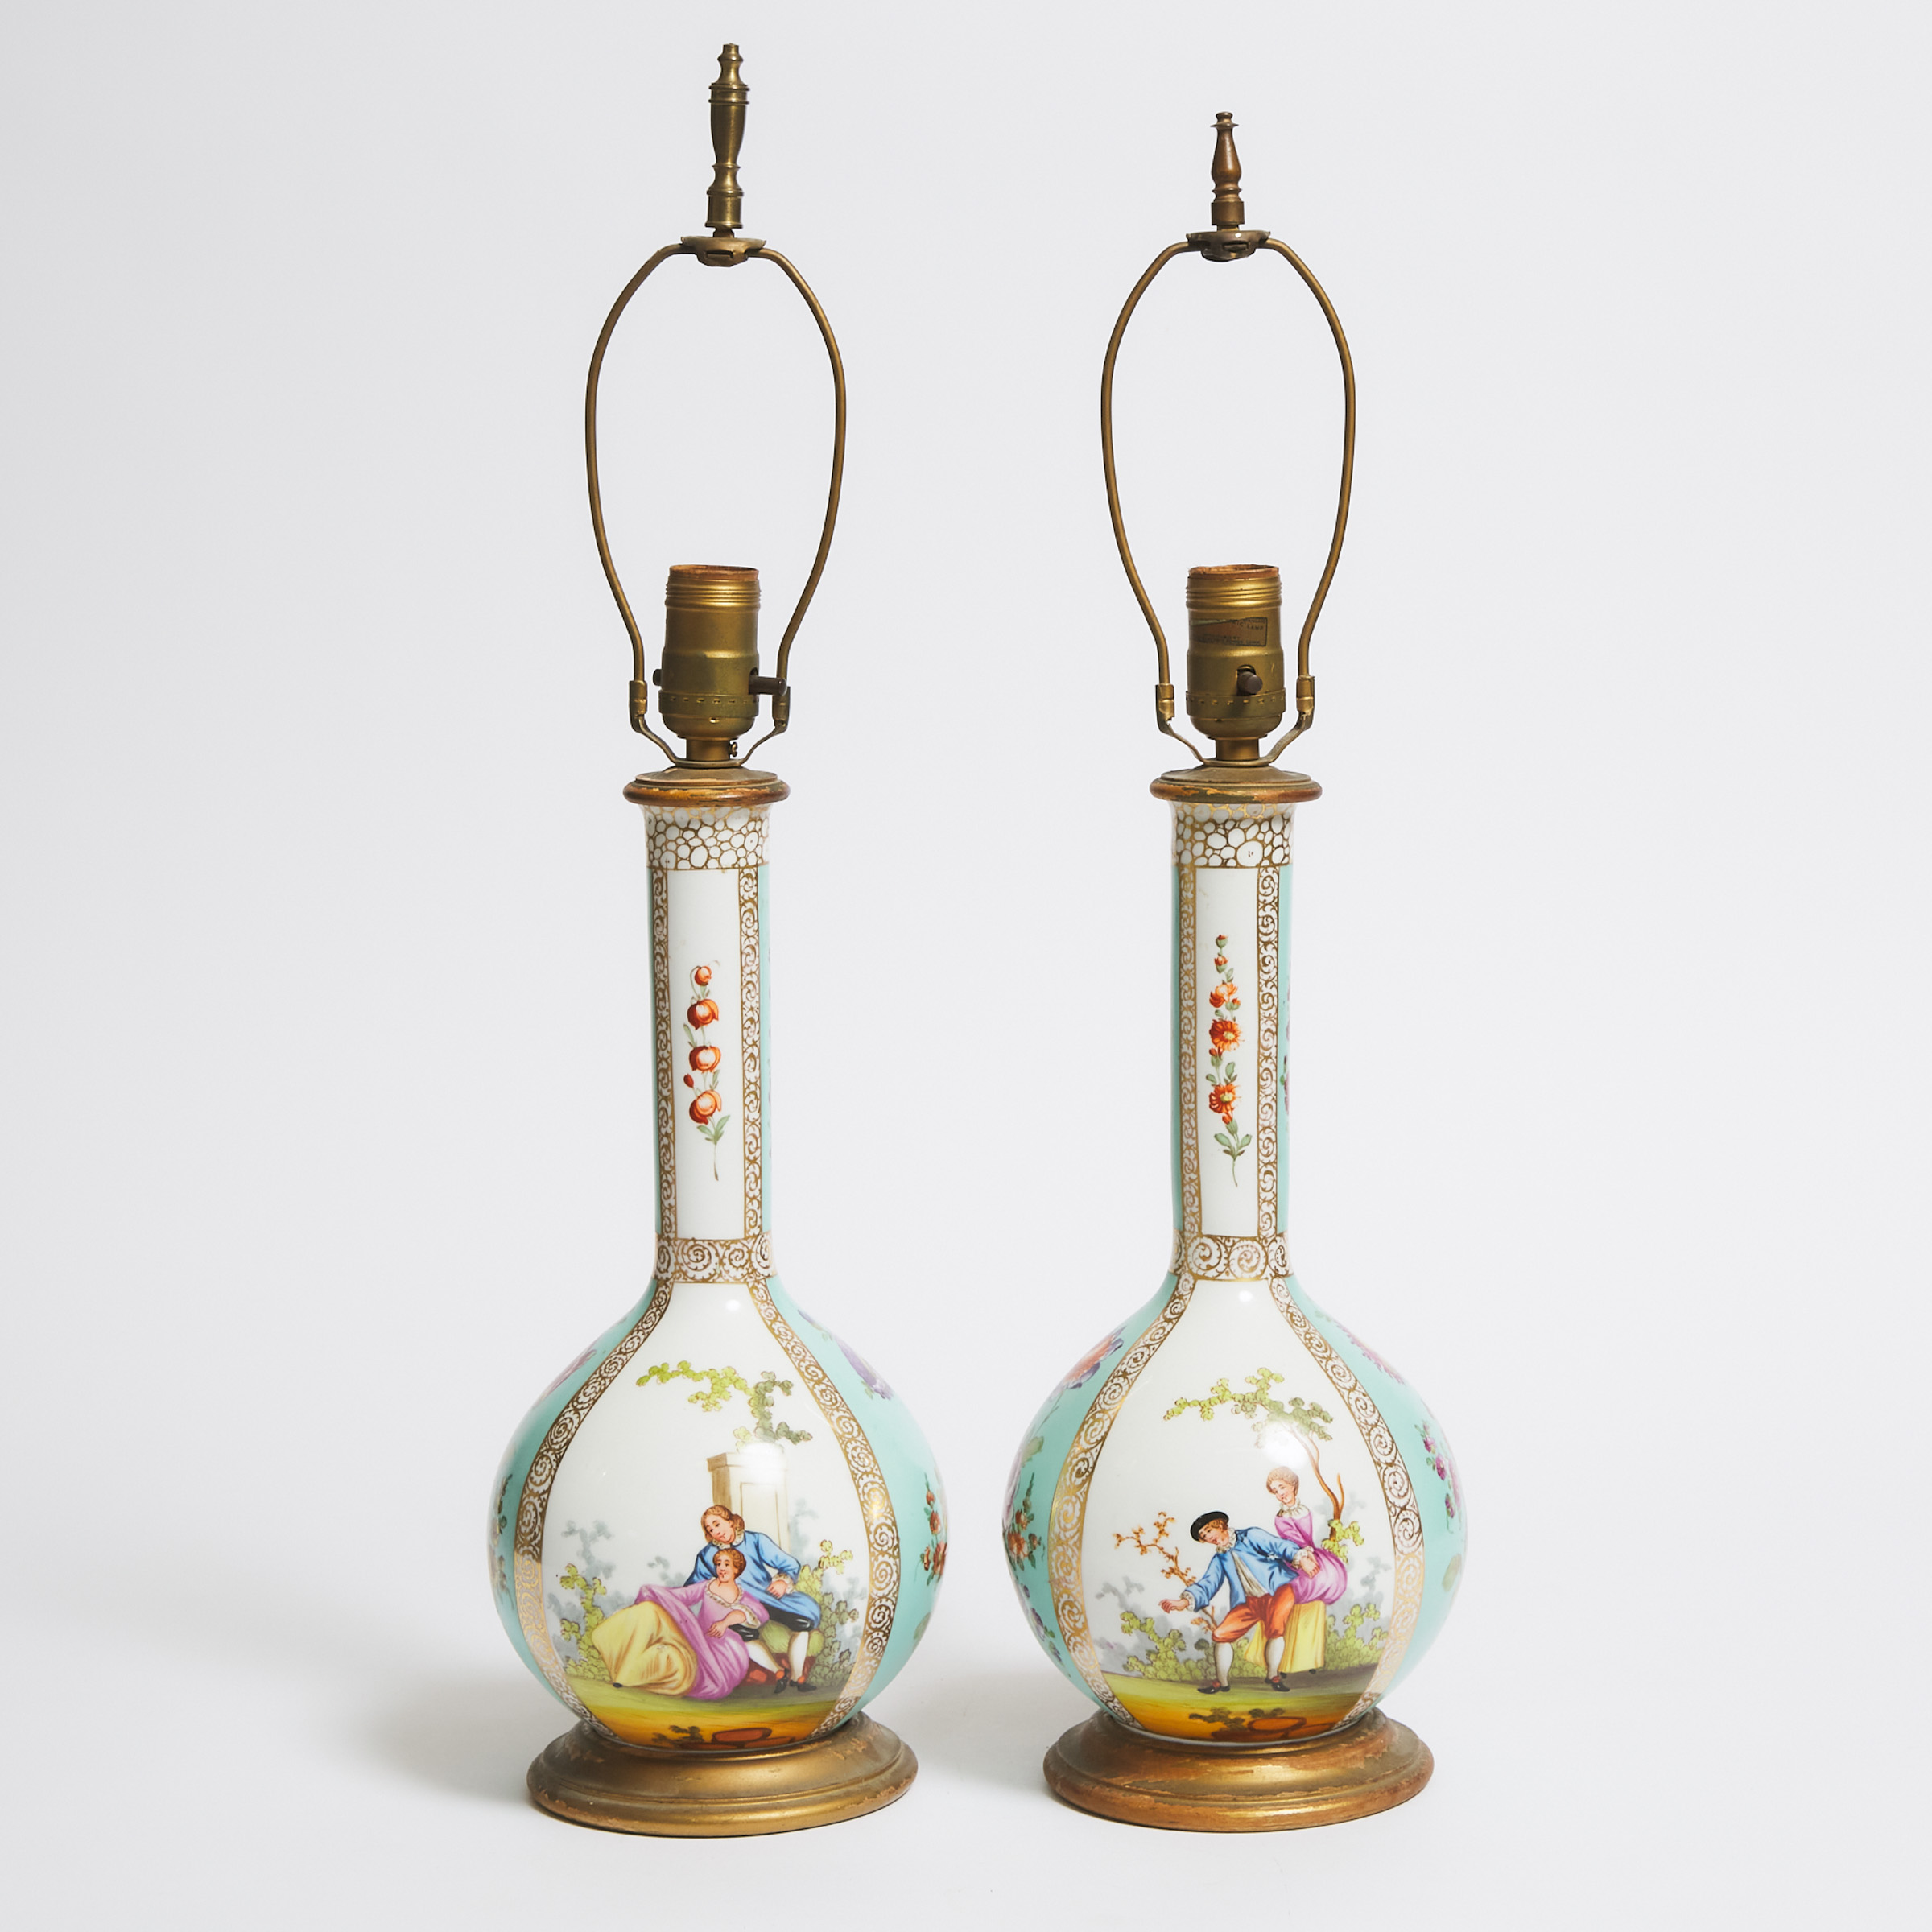 Pair of Dresden Table Lamps, probably Helena Wolfsohn, late 19th/early 20th century